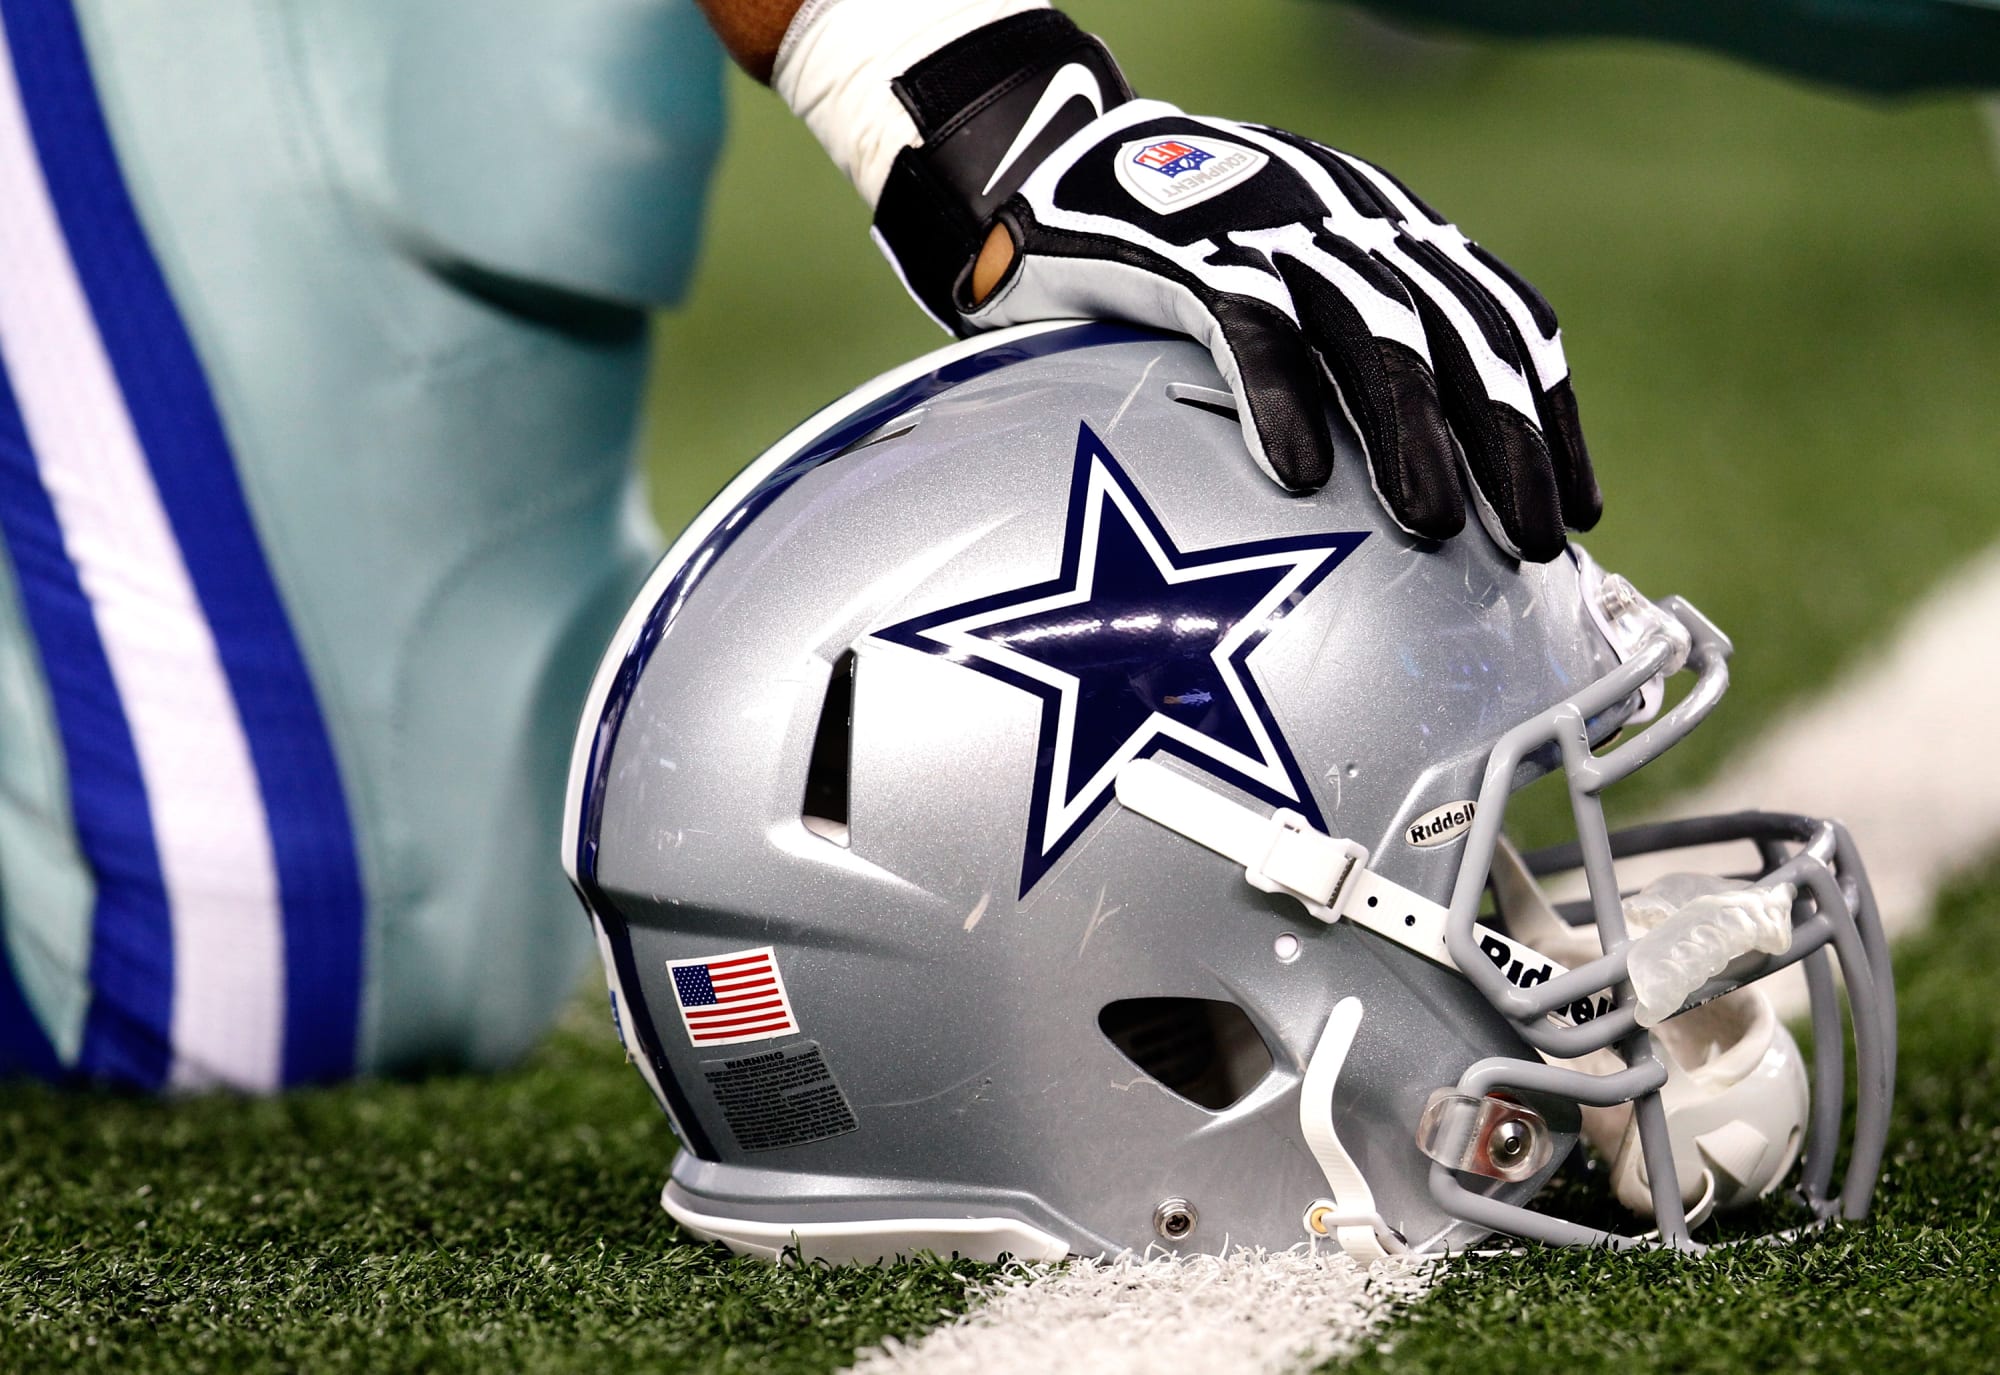 Dallas Cowboys rumors point to this potential free agent